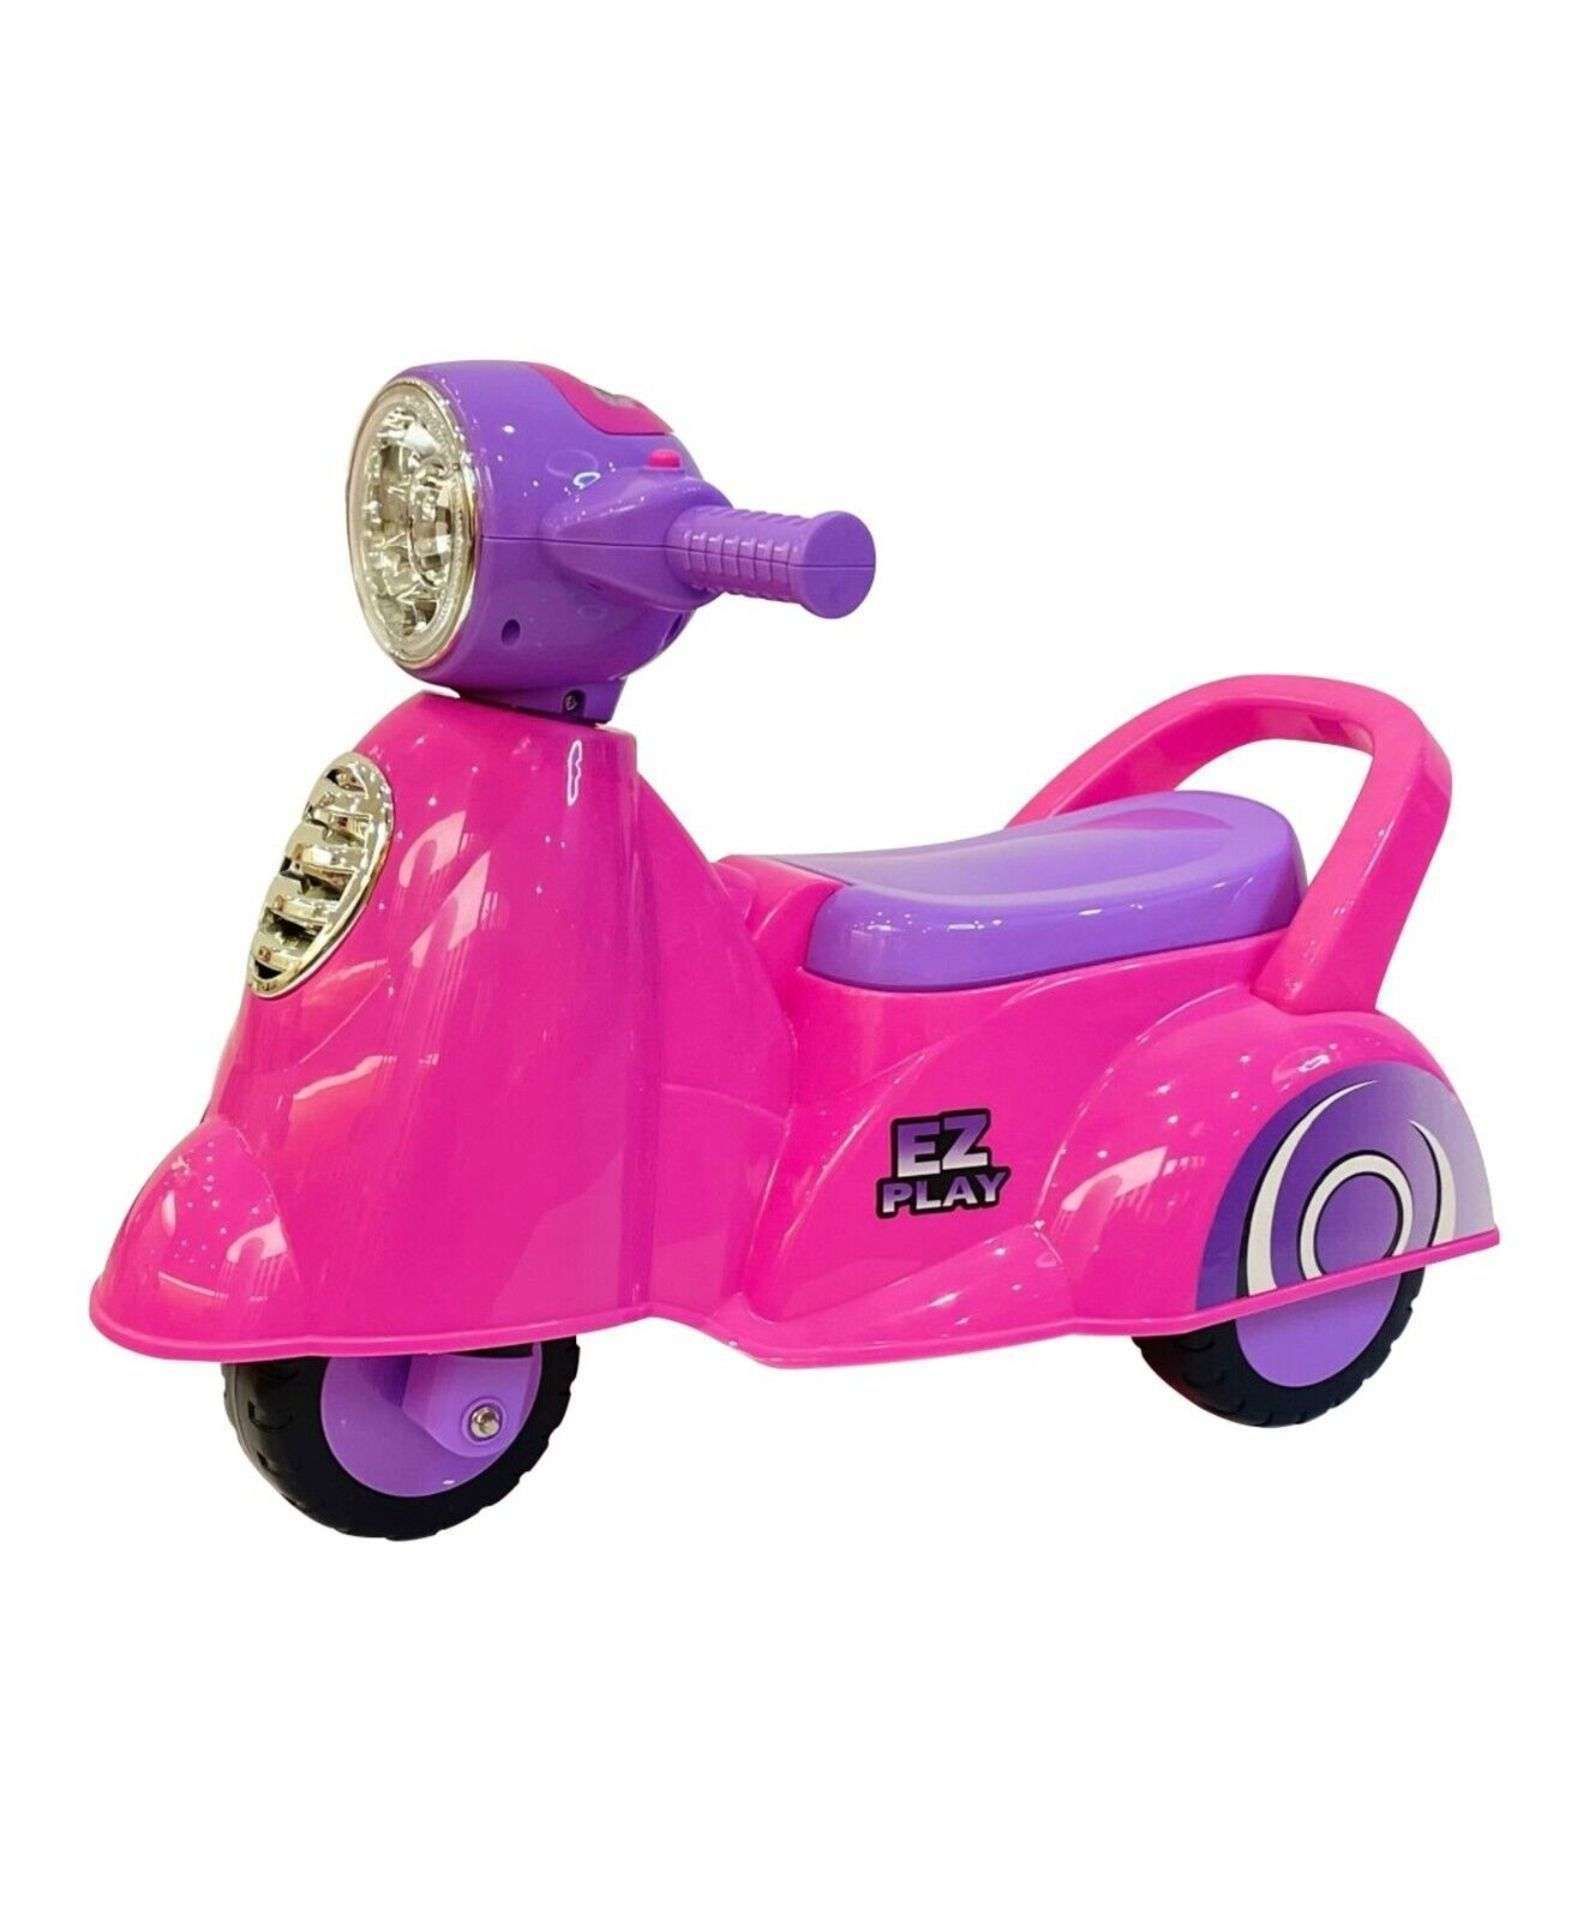 2 X BRAND NEW RICCO TOYS PINK CHILDRENS RIDE ON SCOOTERS R6-7